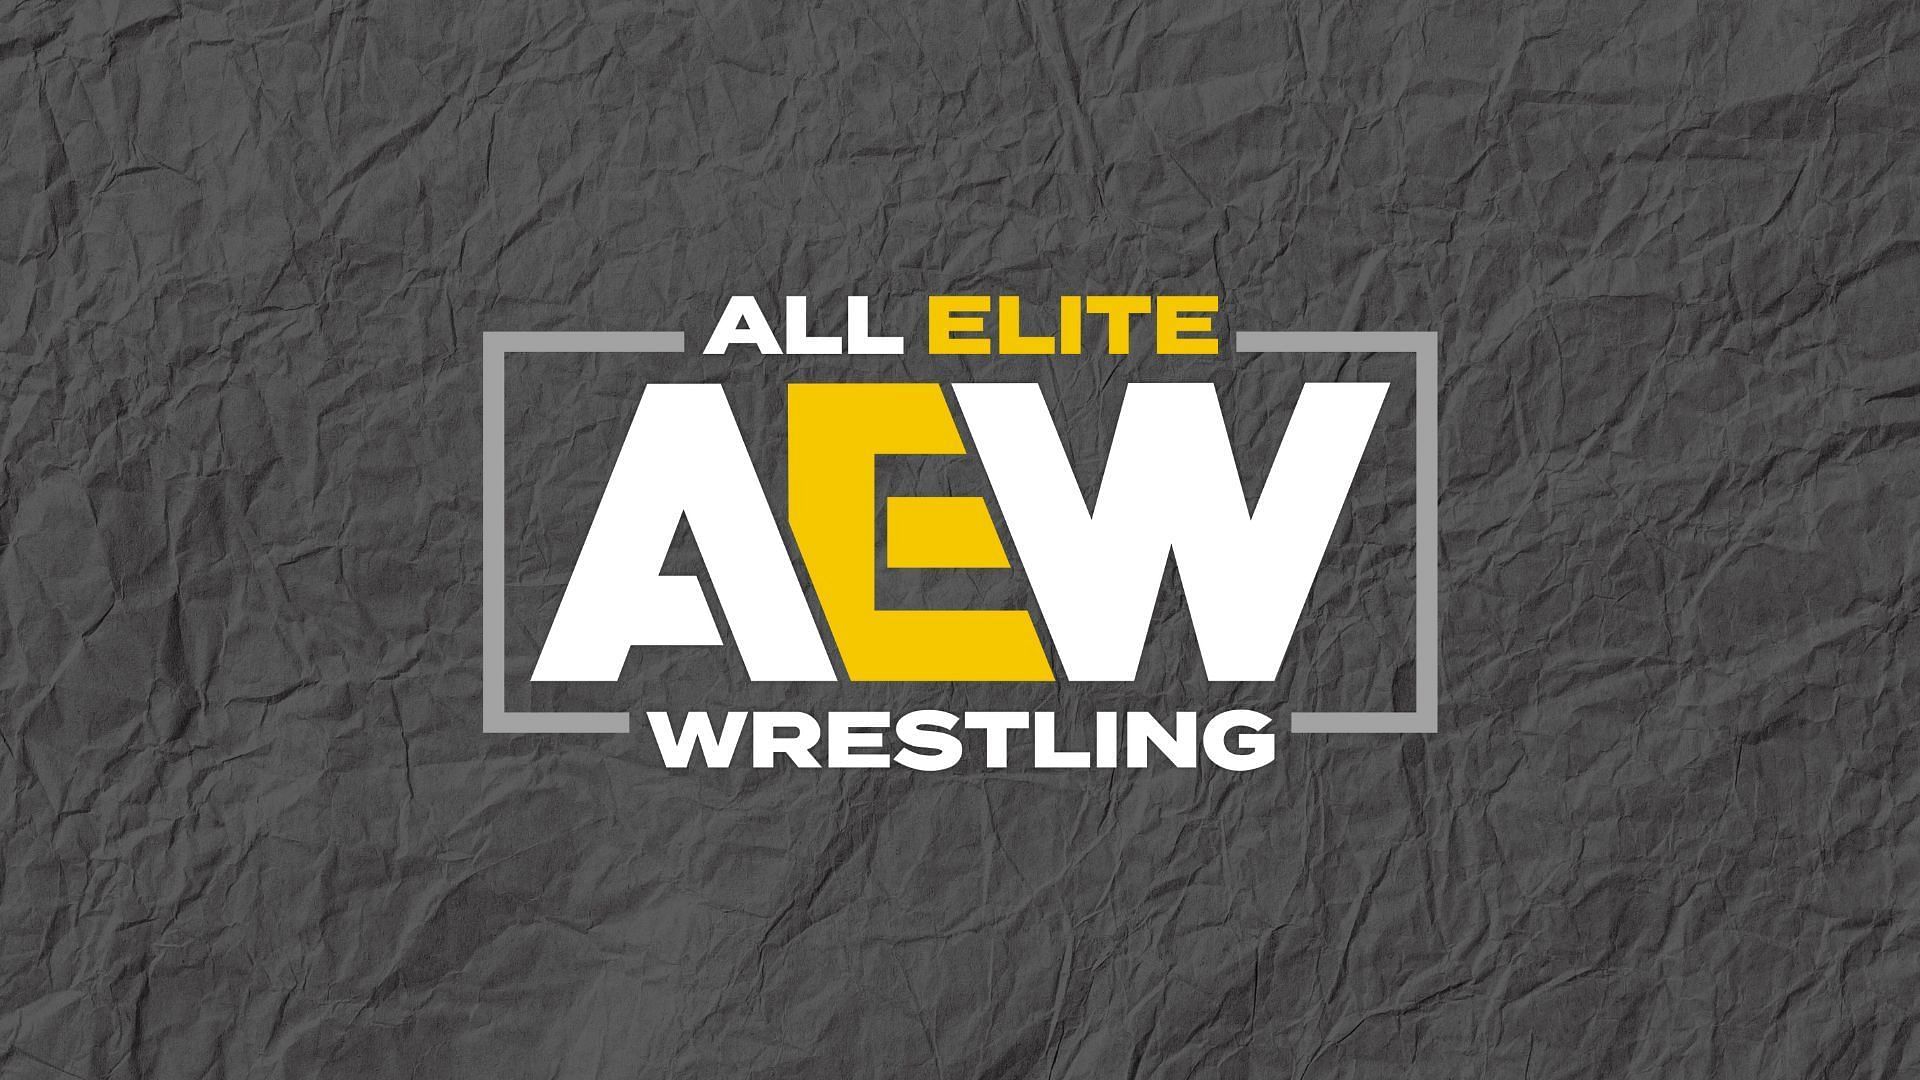 Could the former world champion join AEW?